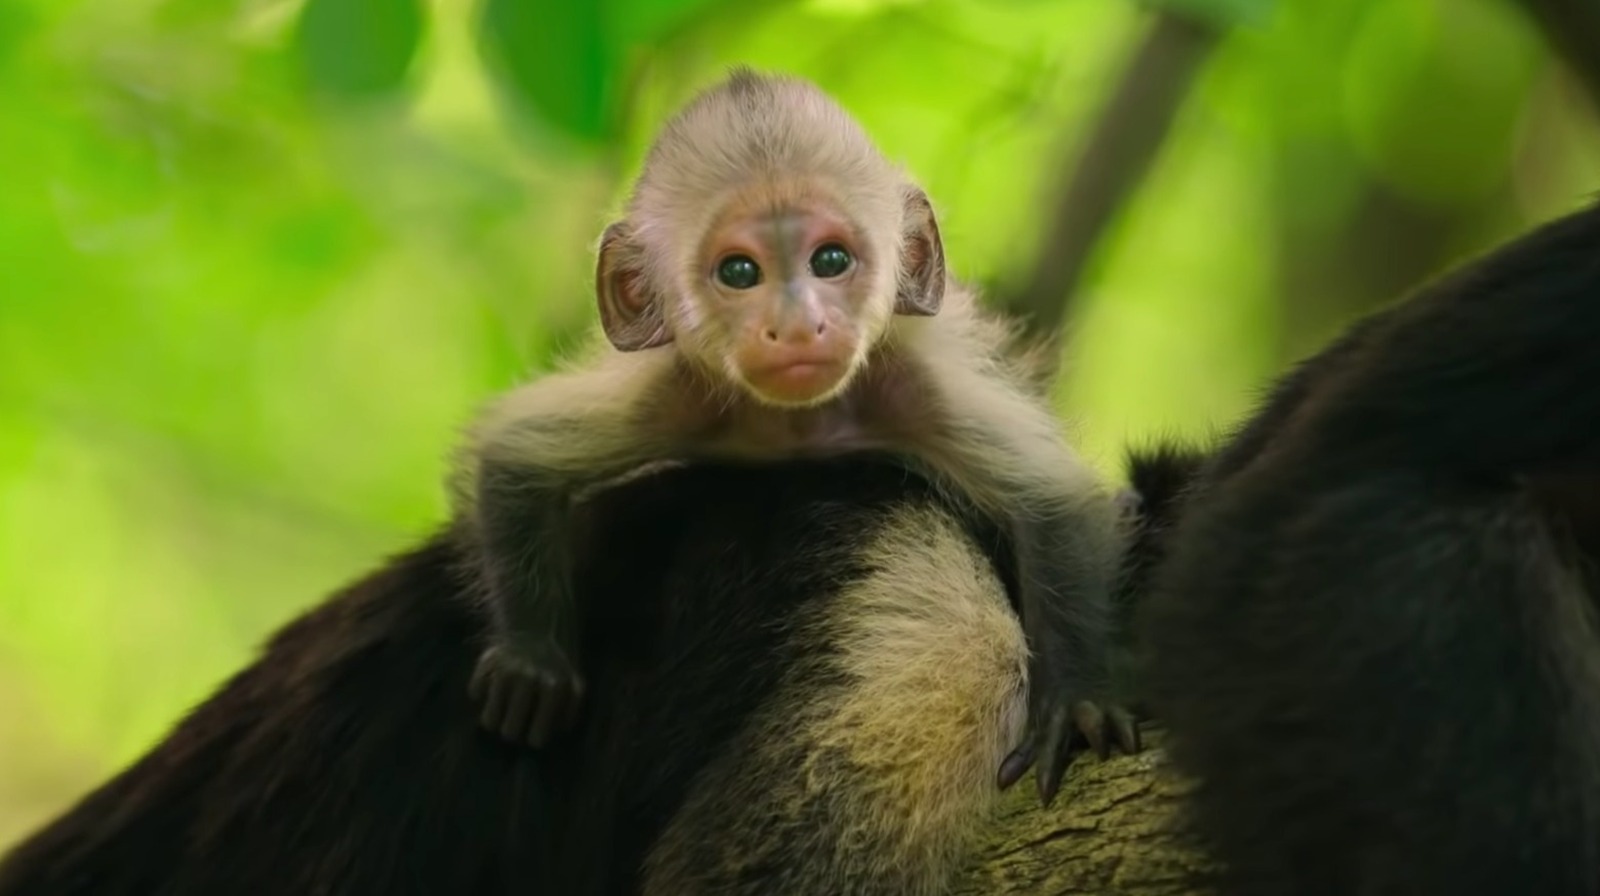 #2022 Has Been Tough, So Here’s A Nature Docuseries About Baby Animals